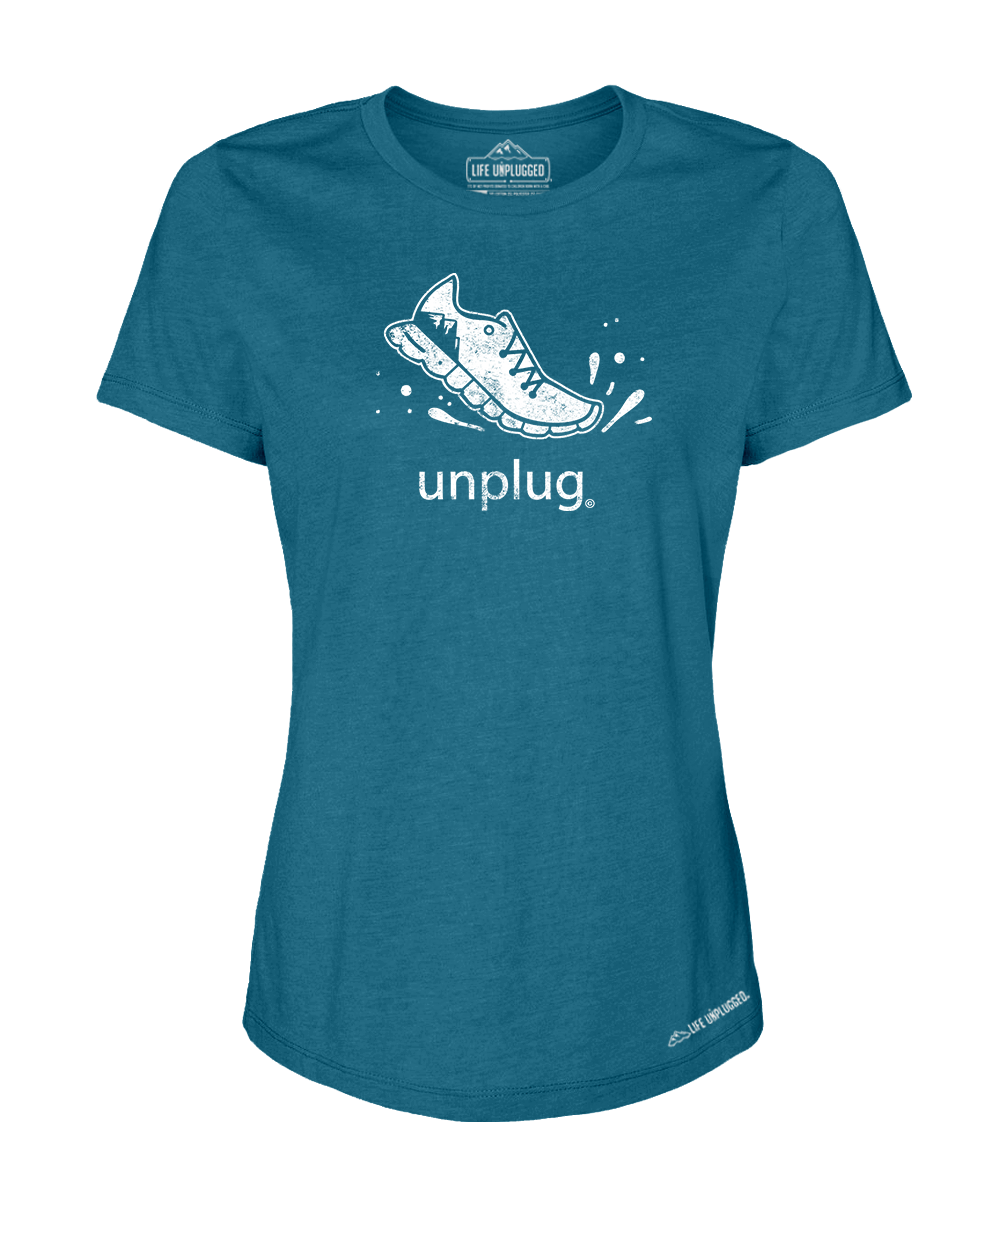 Running Premium Women's Relaxed Fit Polyblend T-Shirt - Life Unplugged